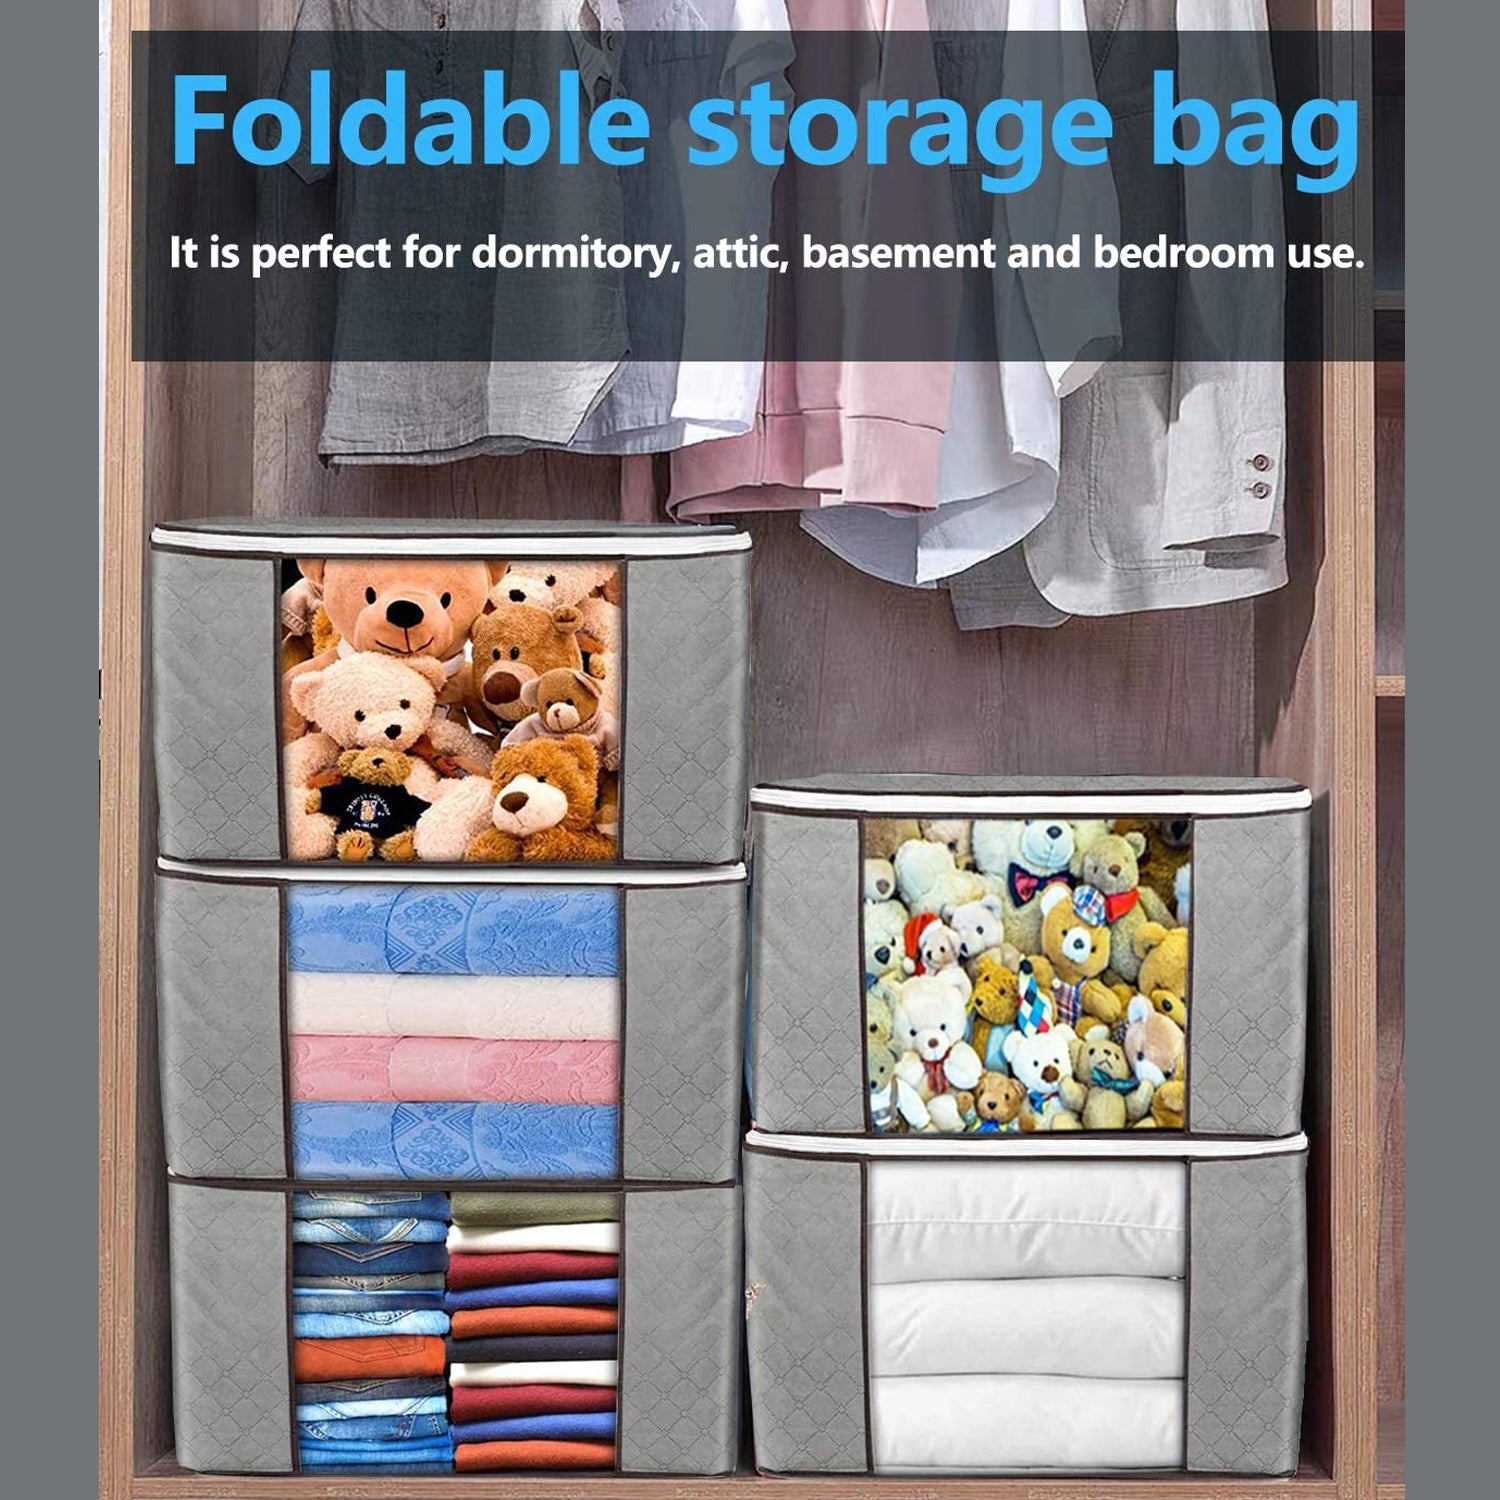 6111A TRAVELLING STORAGE BAG USED IN STORING ALL TYPES CLOTHS AND STUFFS FOR TRAVELLING PURPOSES IN ALL KIND OF NEEDS. 